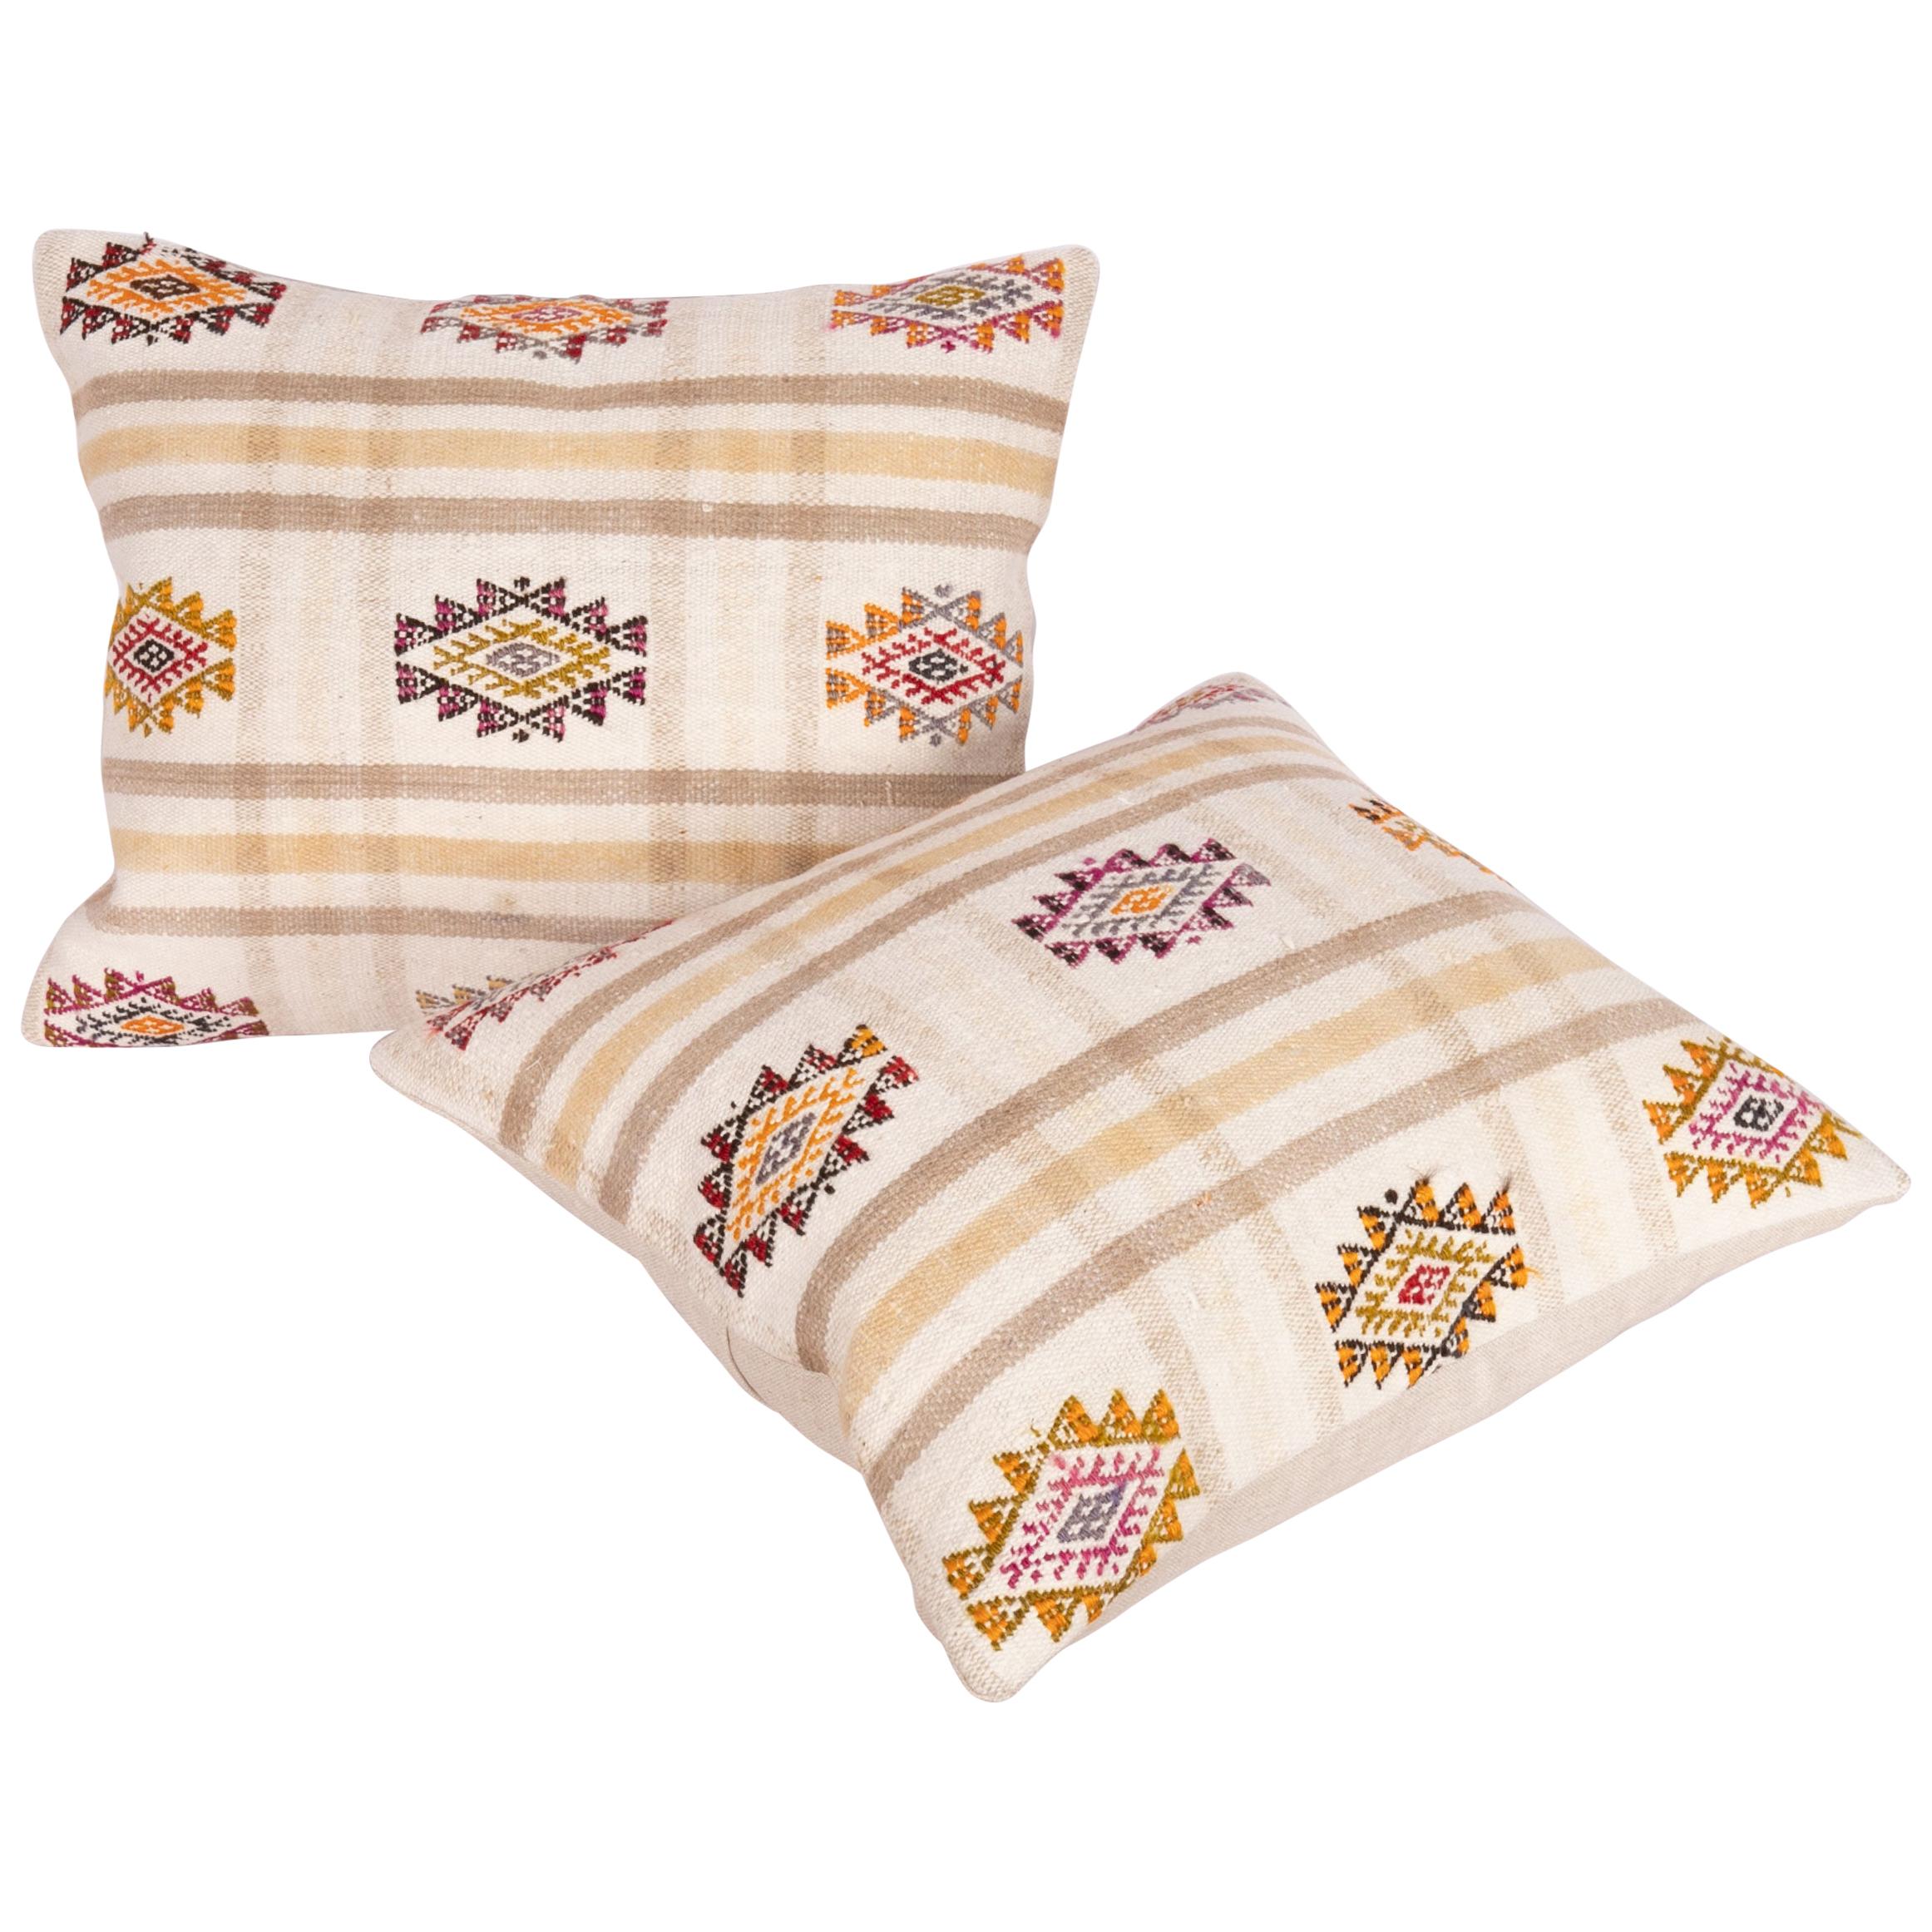 Cotton Cicim Pillow Cases Made from an Anatolian Cicim Kilim, Mid-20th Century